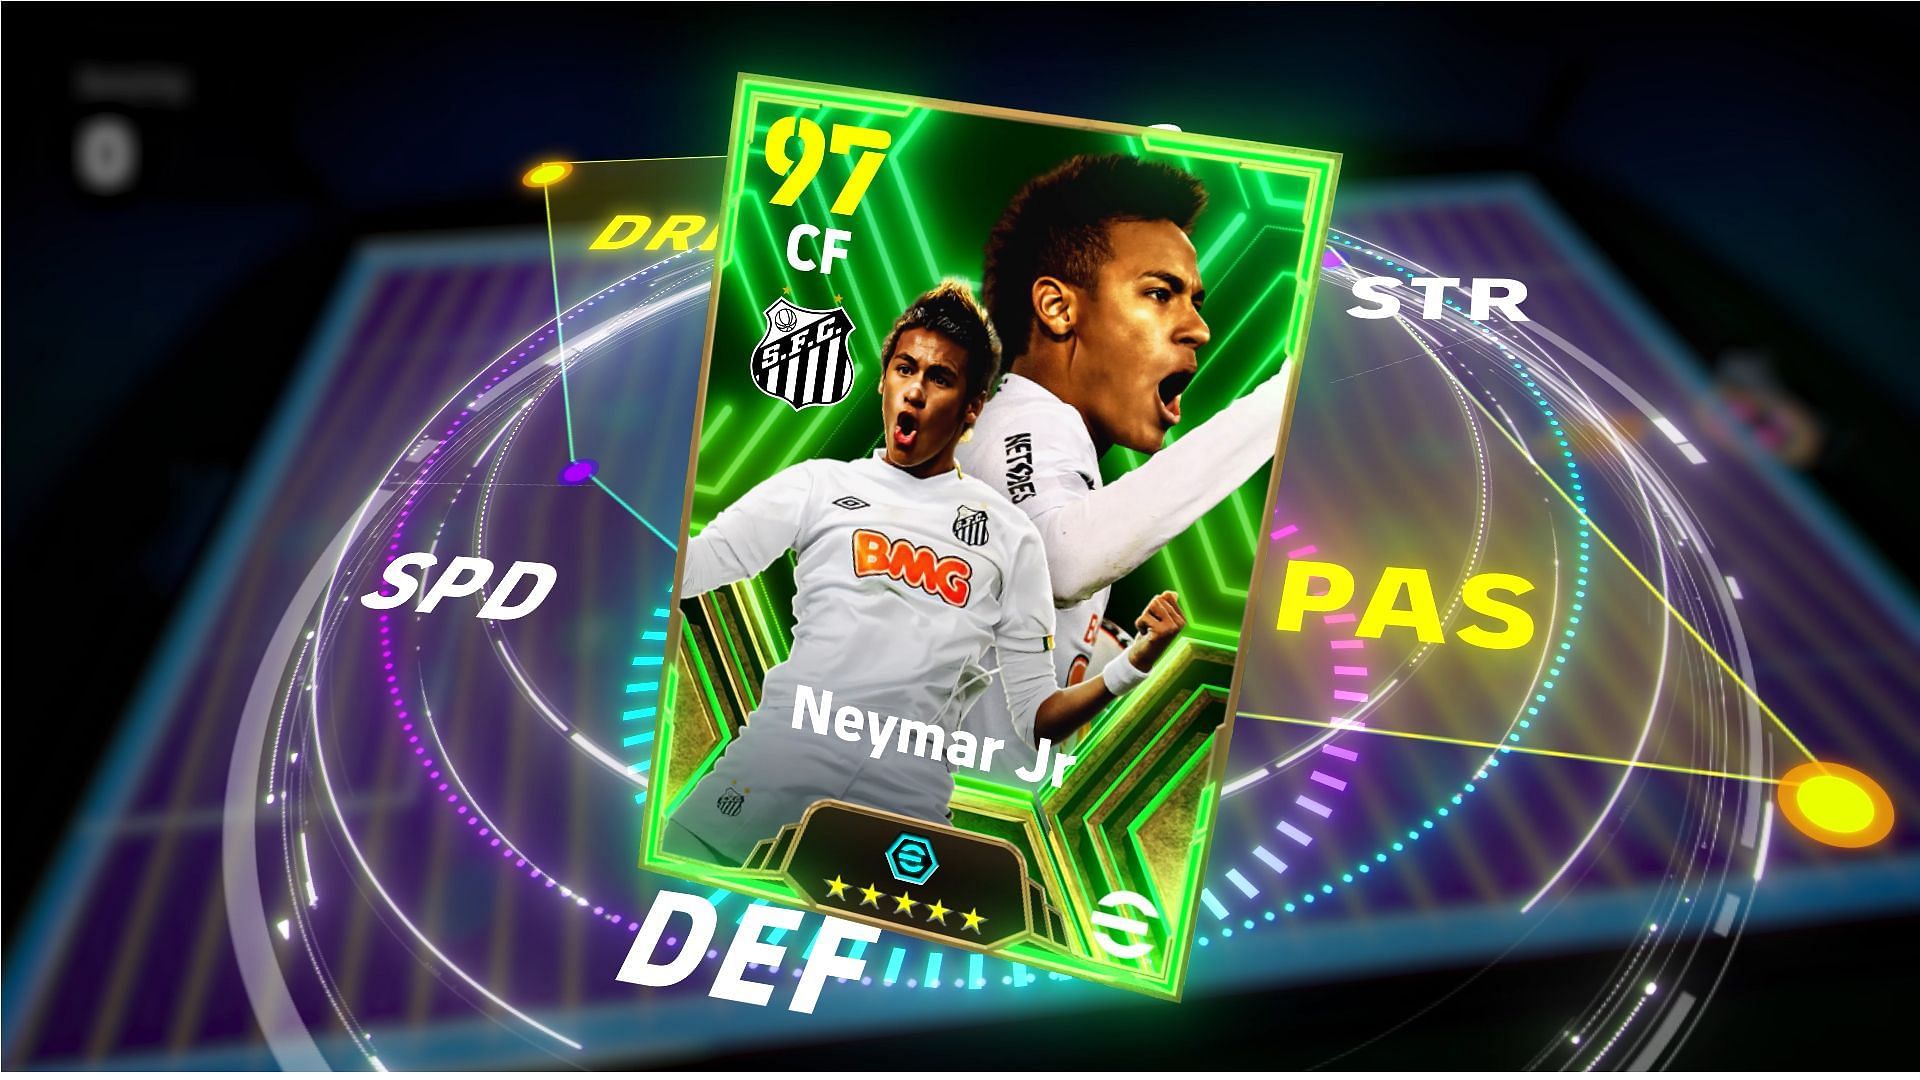 You can grab the Neymar Jr card for completing the first lap (Image via Konami)